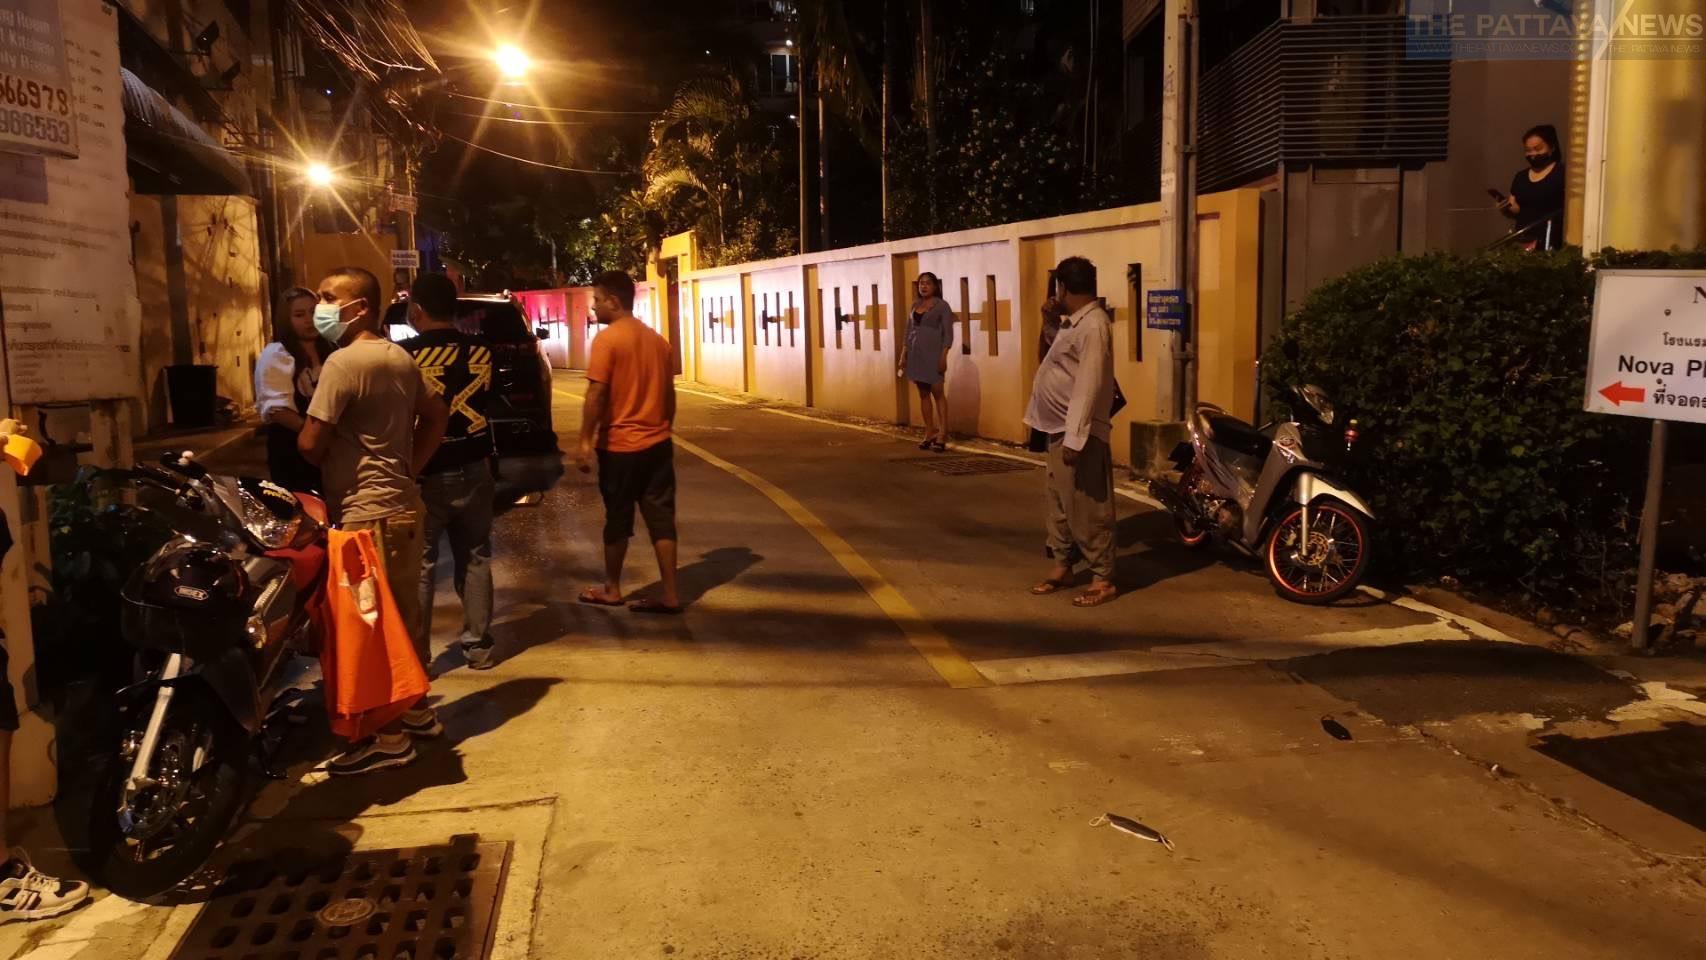 Reader mailbag: Pickpocketed on Second Road in Pattaya, the issue currently is real